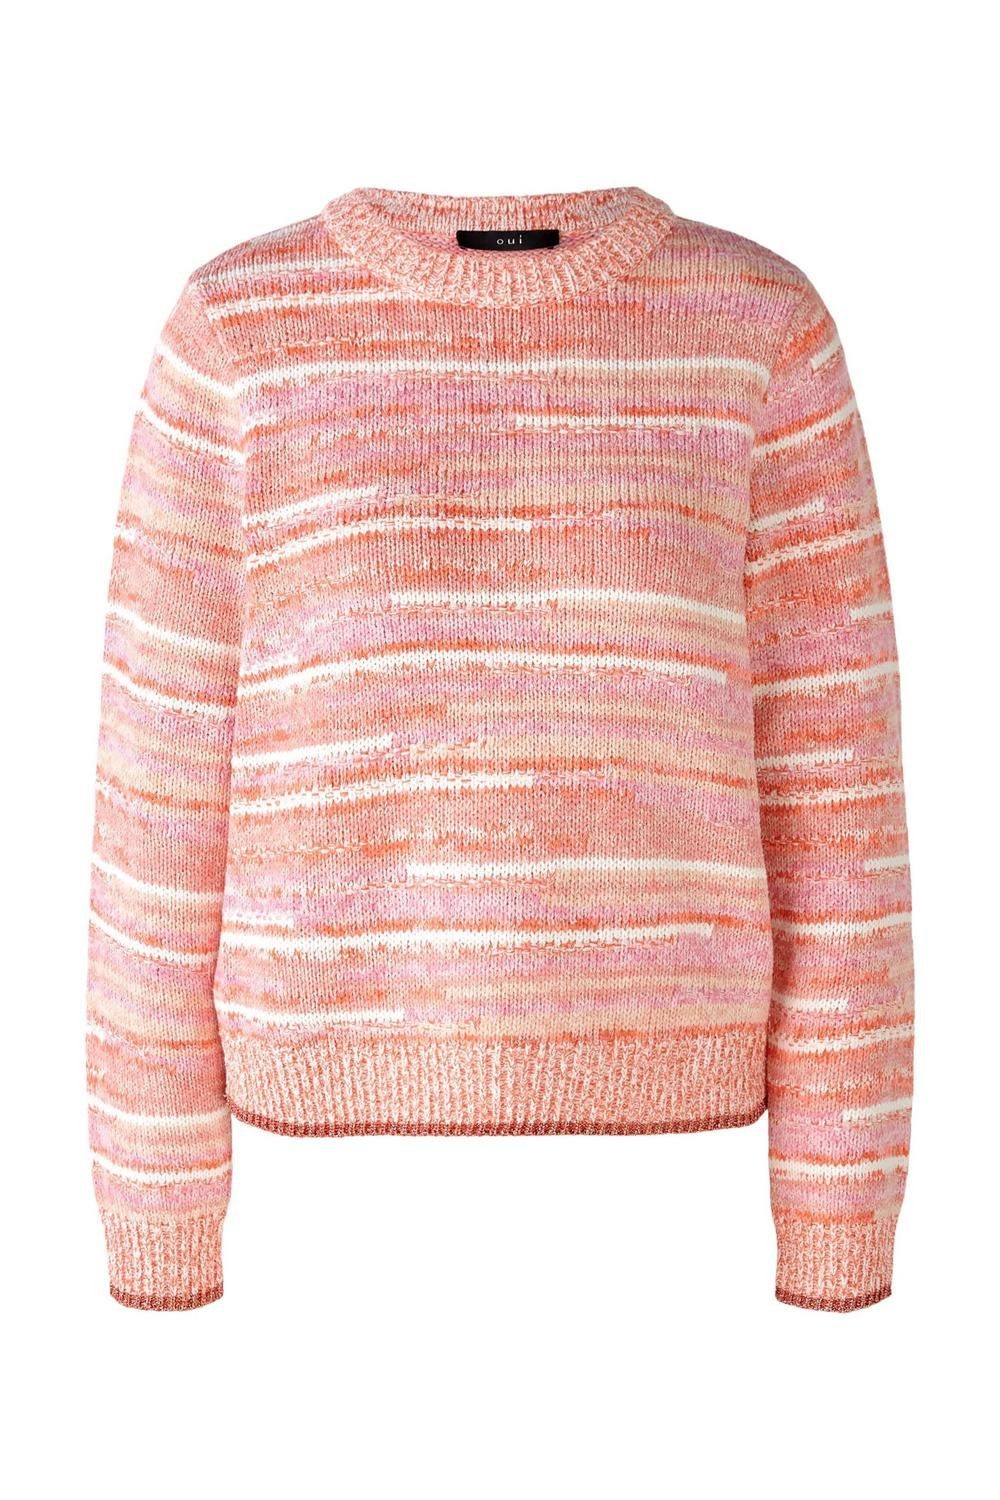 Oui Sweatshirt Pullover, apricot red